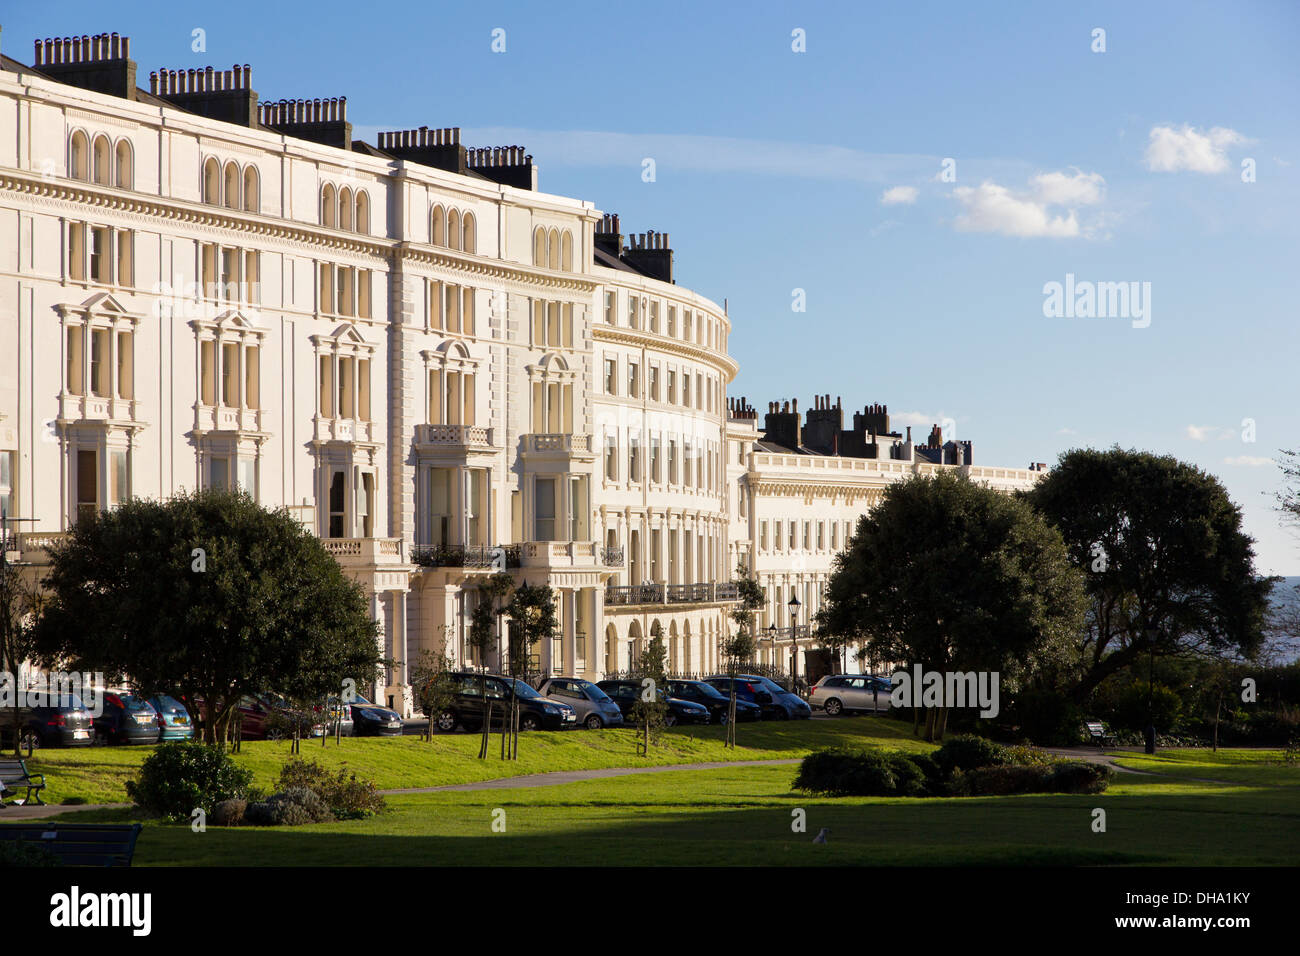 Hove, East Sussex, UK - 4 Nov 2013: Curved terraces of fine architecture in Palmeira Square, Brighton and Hove Stock Photo